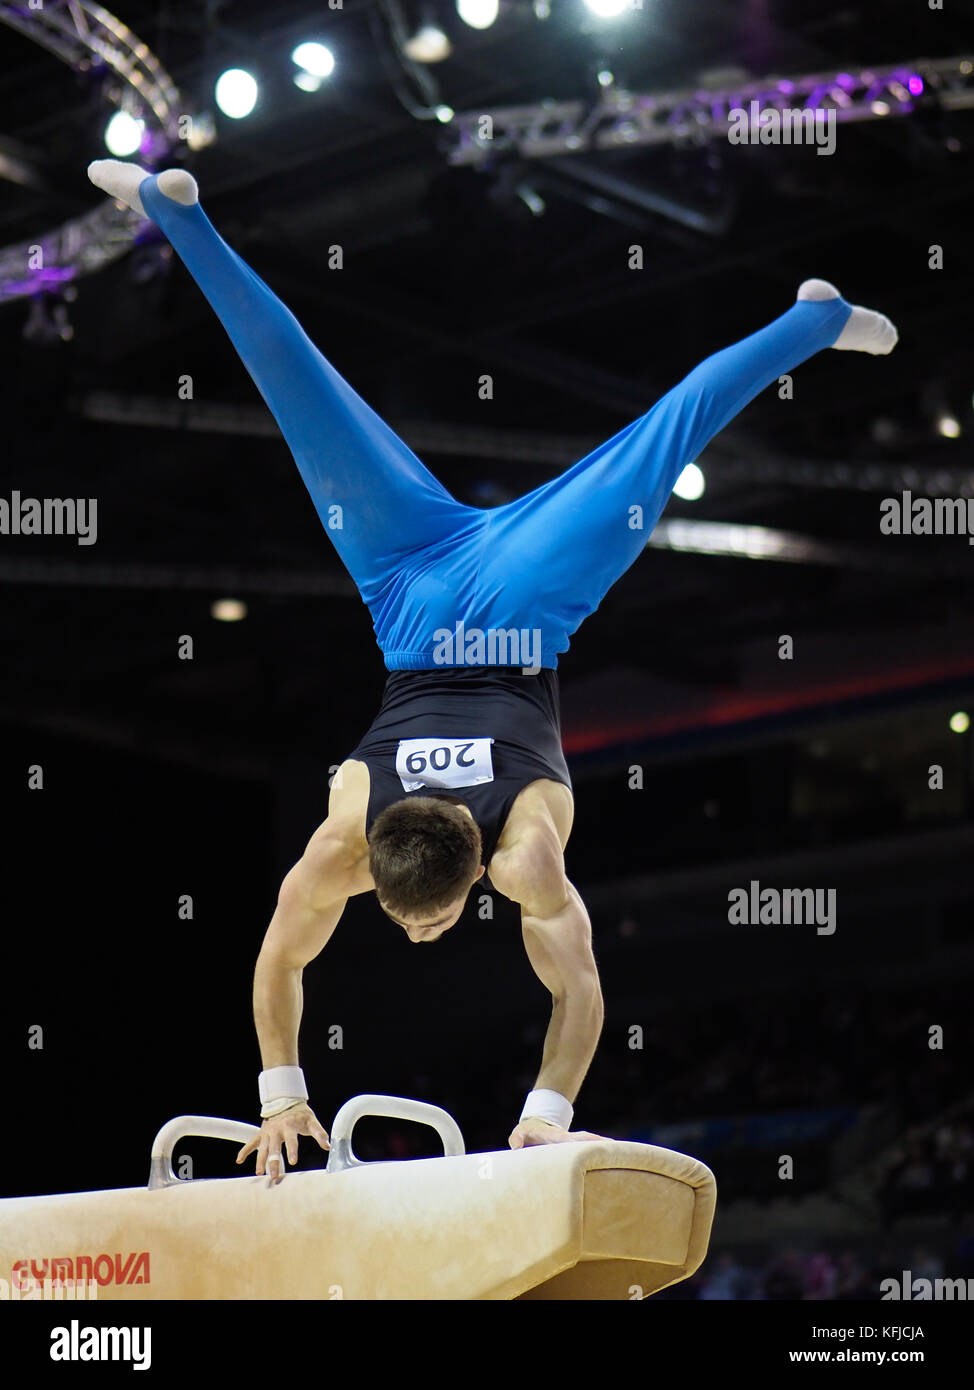 Sam Oldham in action at the 2017 British Gymnastics Championships.  In 2010 Sam won the high bar title at the Youth Olympics and also claimed the Junior European all-around title in the same year. At senior level, he took fourth place in the high bar final at the 2011 European Championships. After injury he won high bar gold and all-around silver at the 2012 British Championship before going on to claim Olympic team bronze in London. In 2013 success came at the European Championships in the form of high bar silver. At the 2014 British Championships Sam won high bar and rings bronze, finishing  Stock Photo